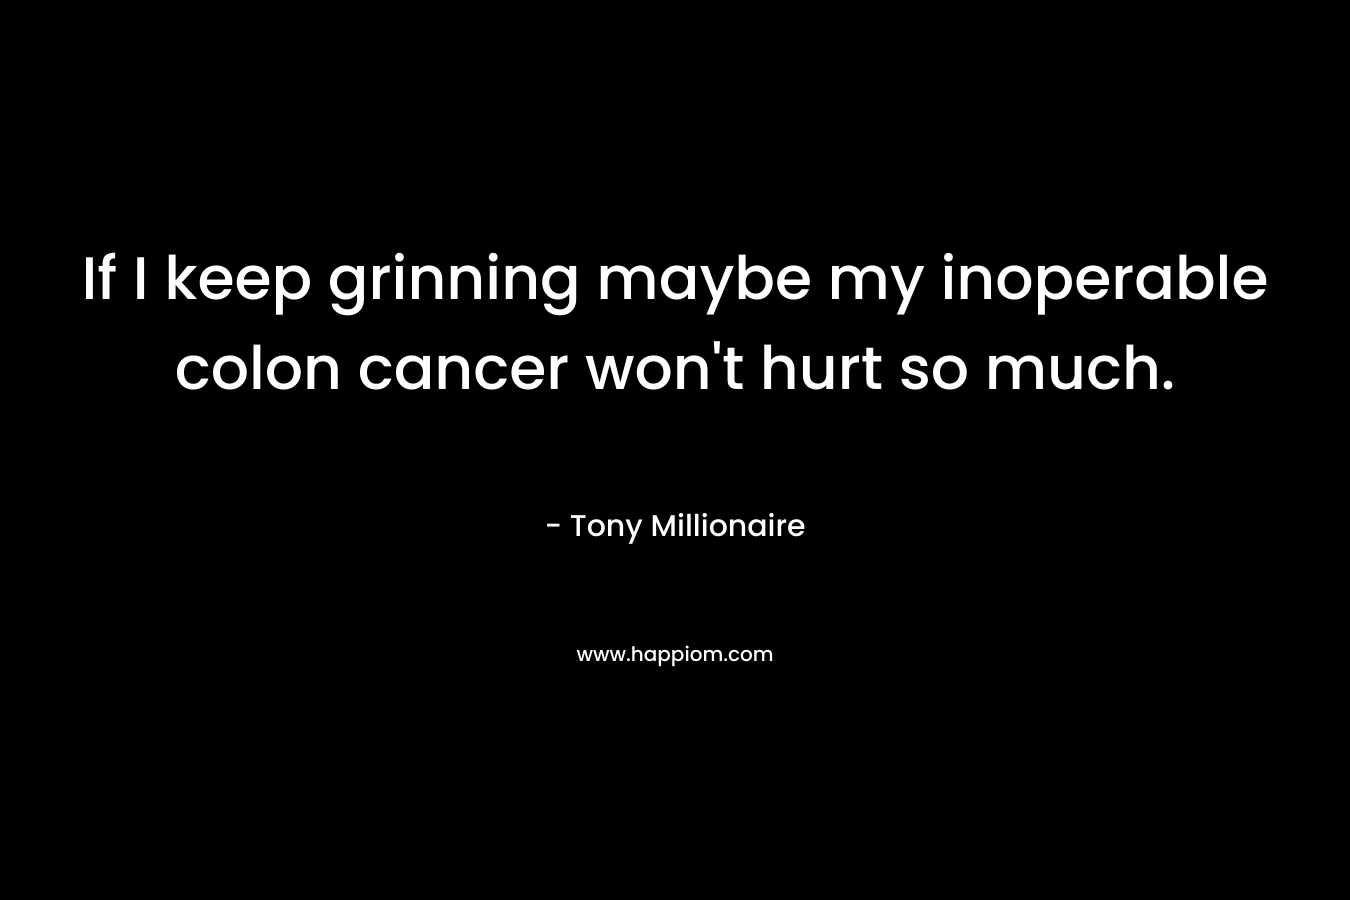 If I keep grinning maybe my inoperable colon cancer won’t hurt so much. – Tony Millionaire